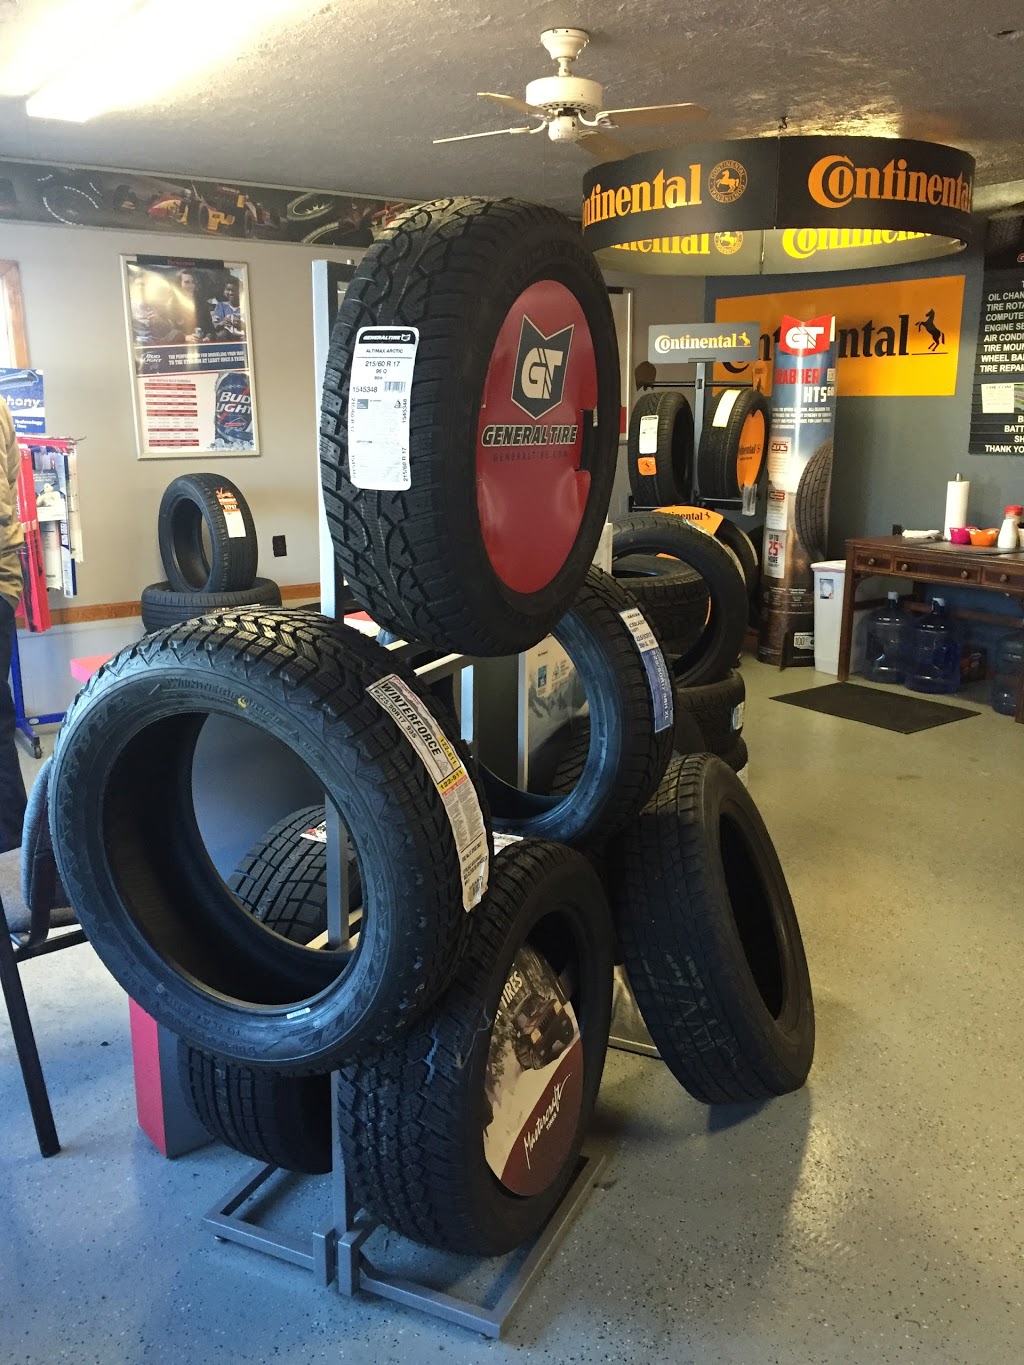 Durfs Tire/ M.J. Autocare | 7642 Rochester Rd, Gasport, NY 14067, USA | Phone: (716) 772-7591